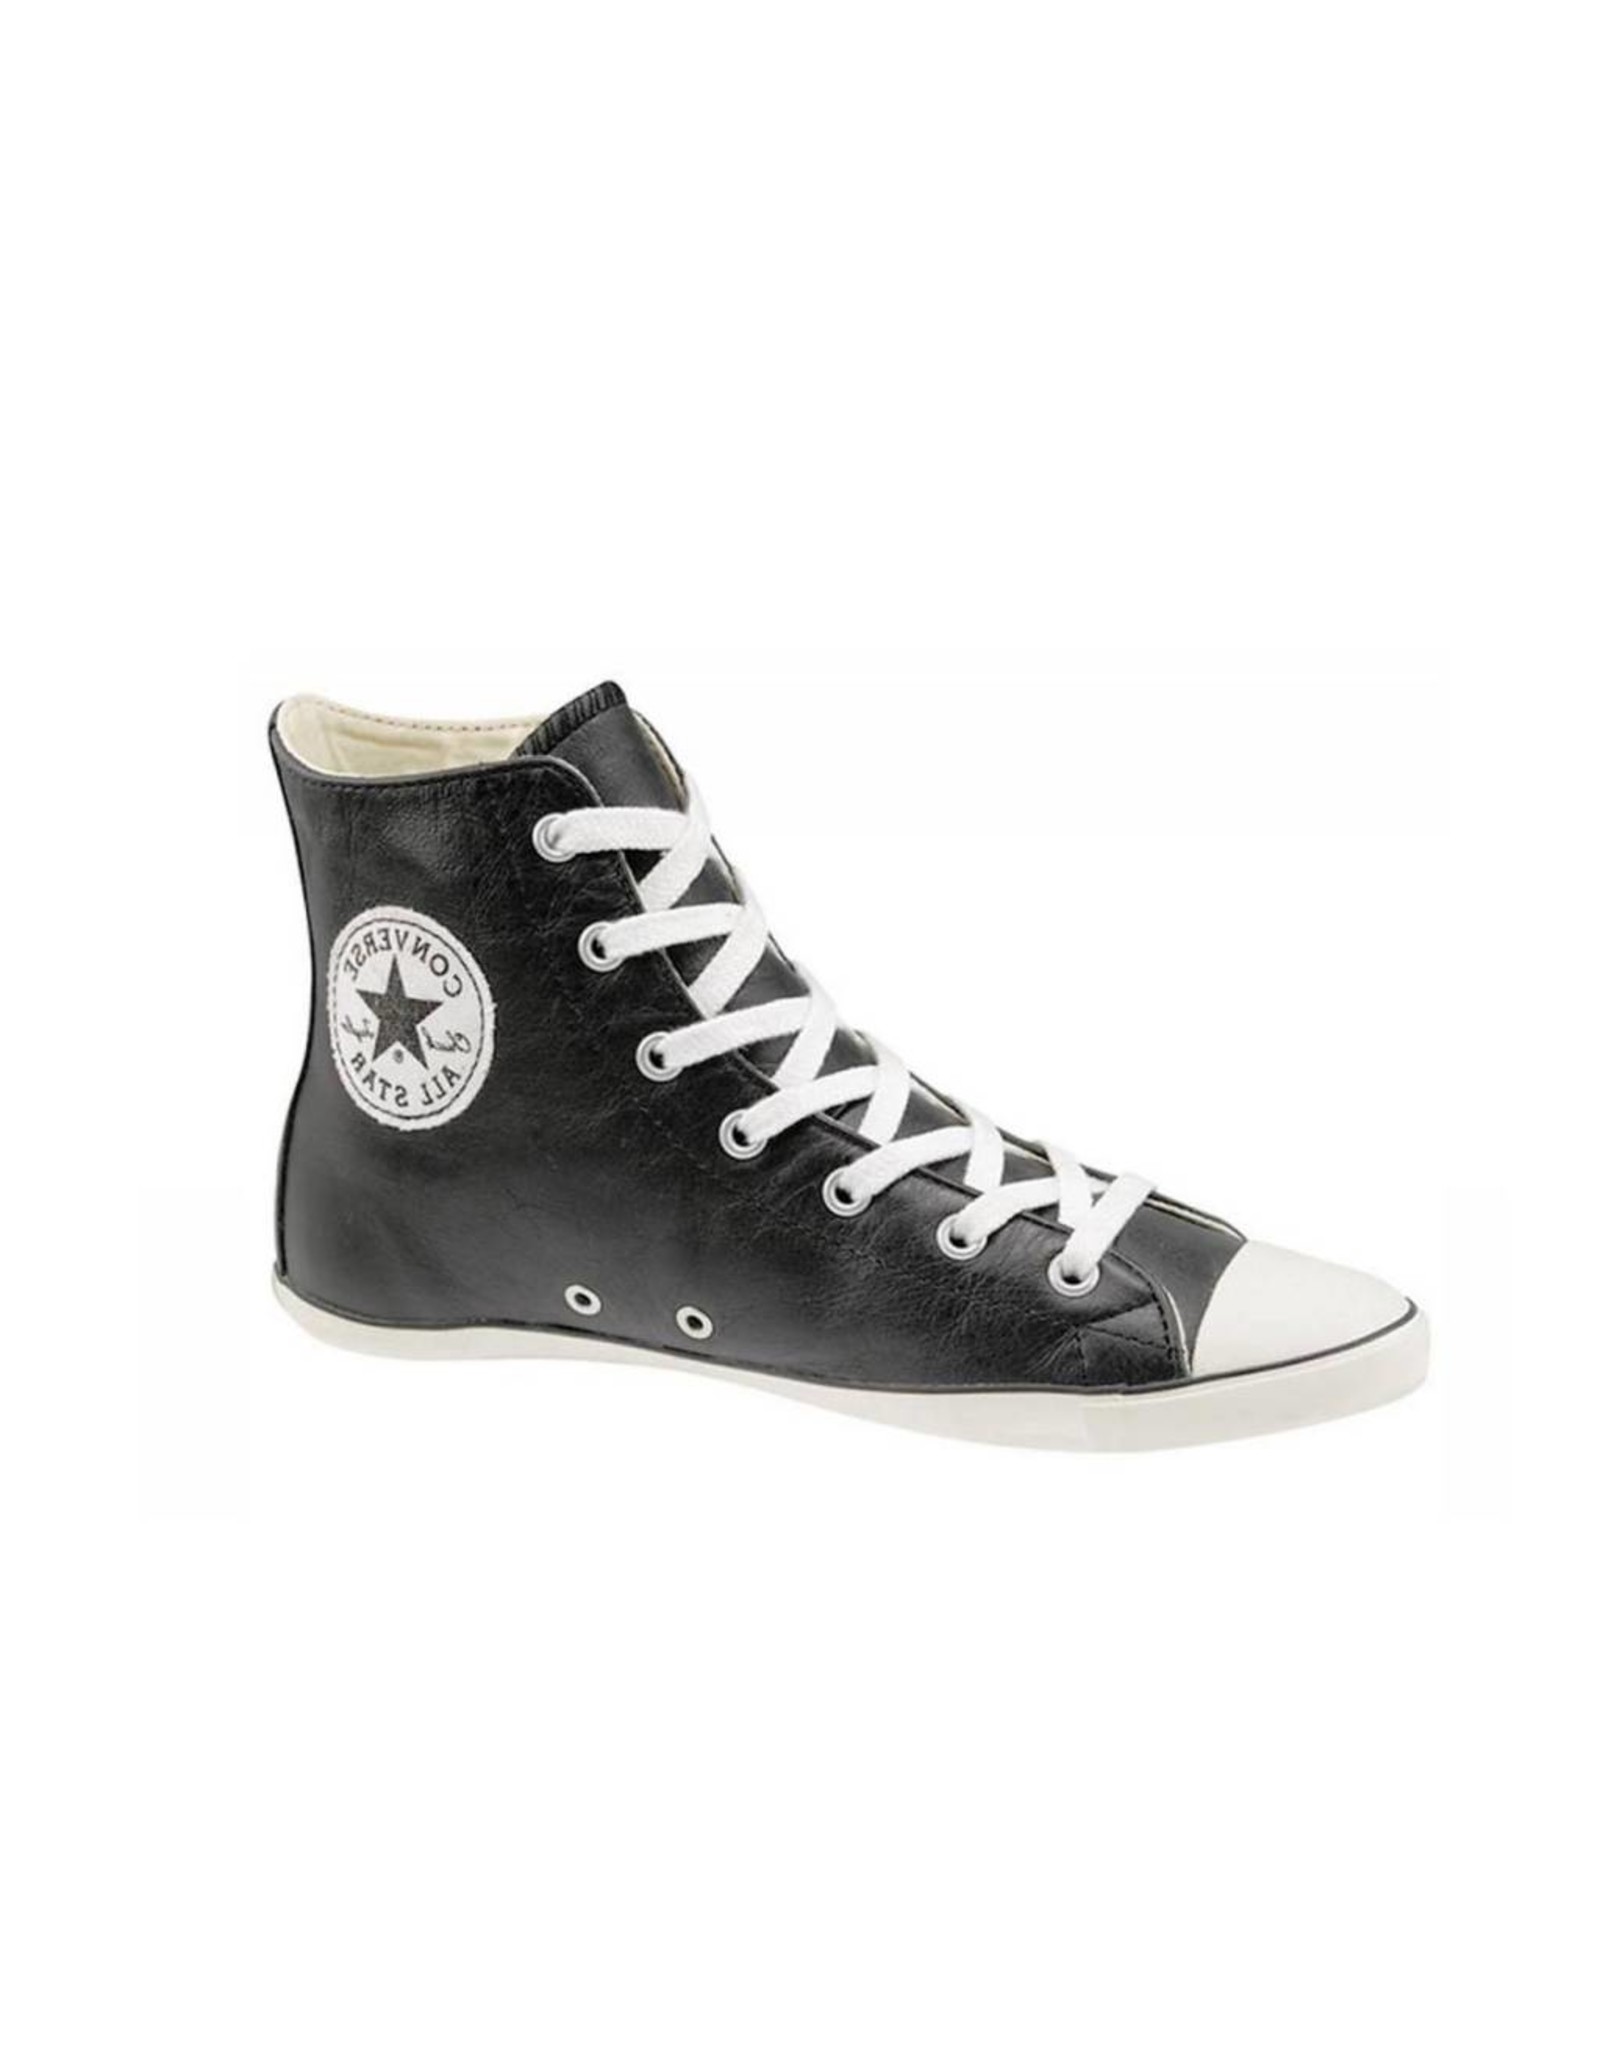 RIO X20 Montreal Converse Chuck Taylor All Star Boots4all - Boutique ...